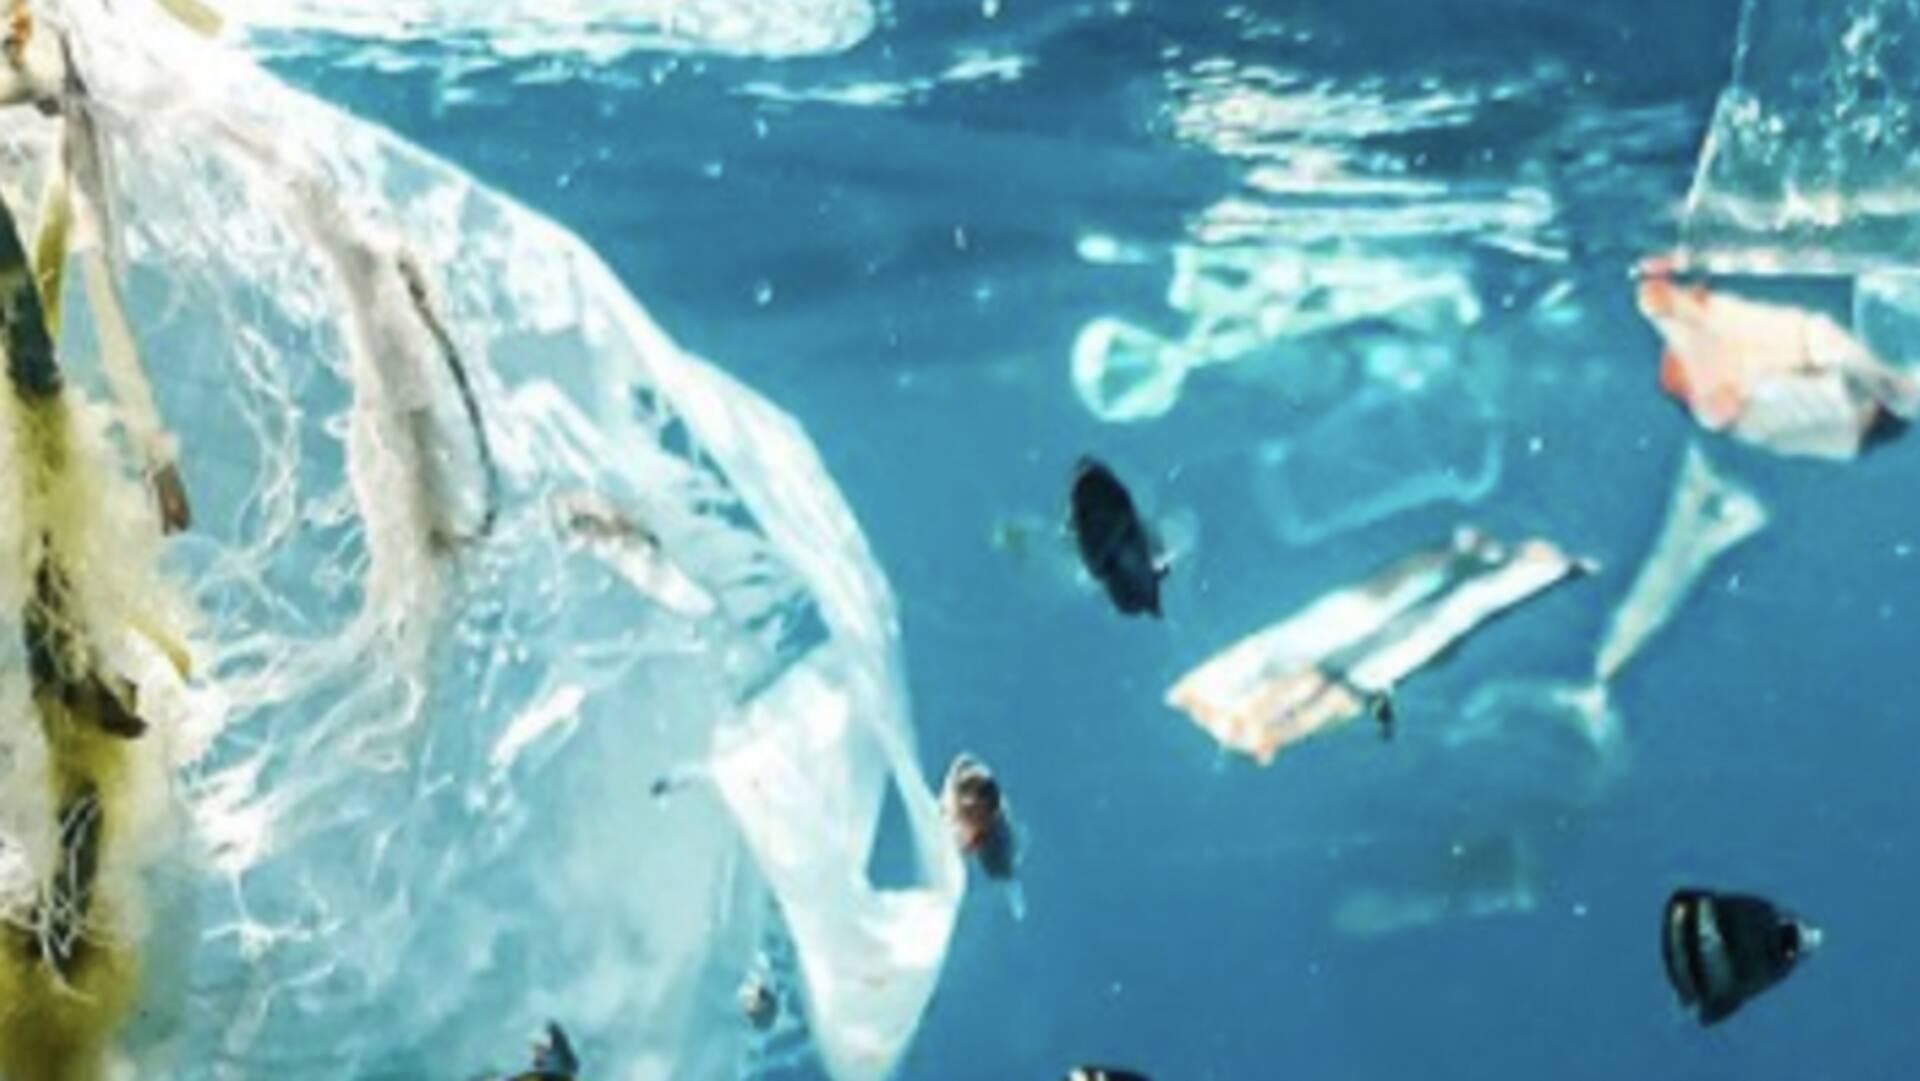 World Environment Day: How UN aims to combat plastic pollution